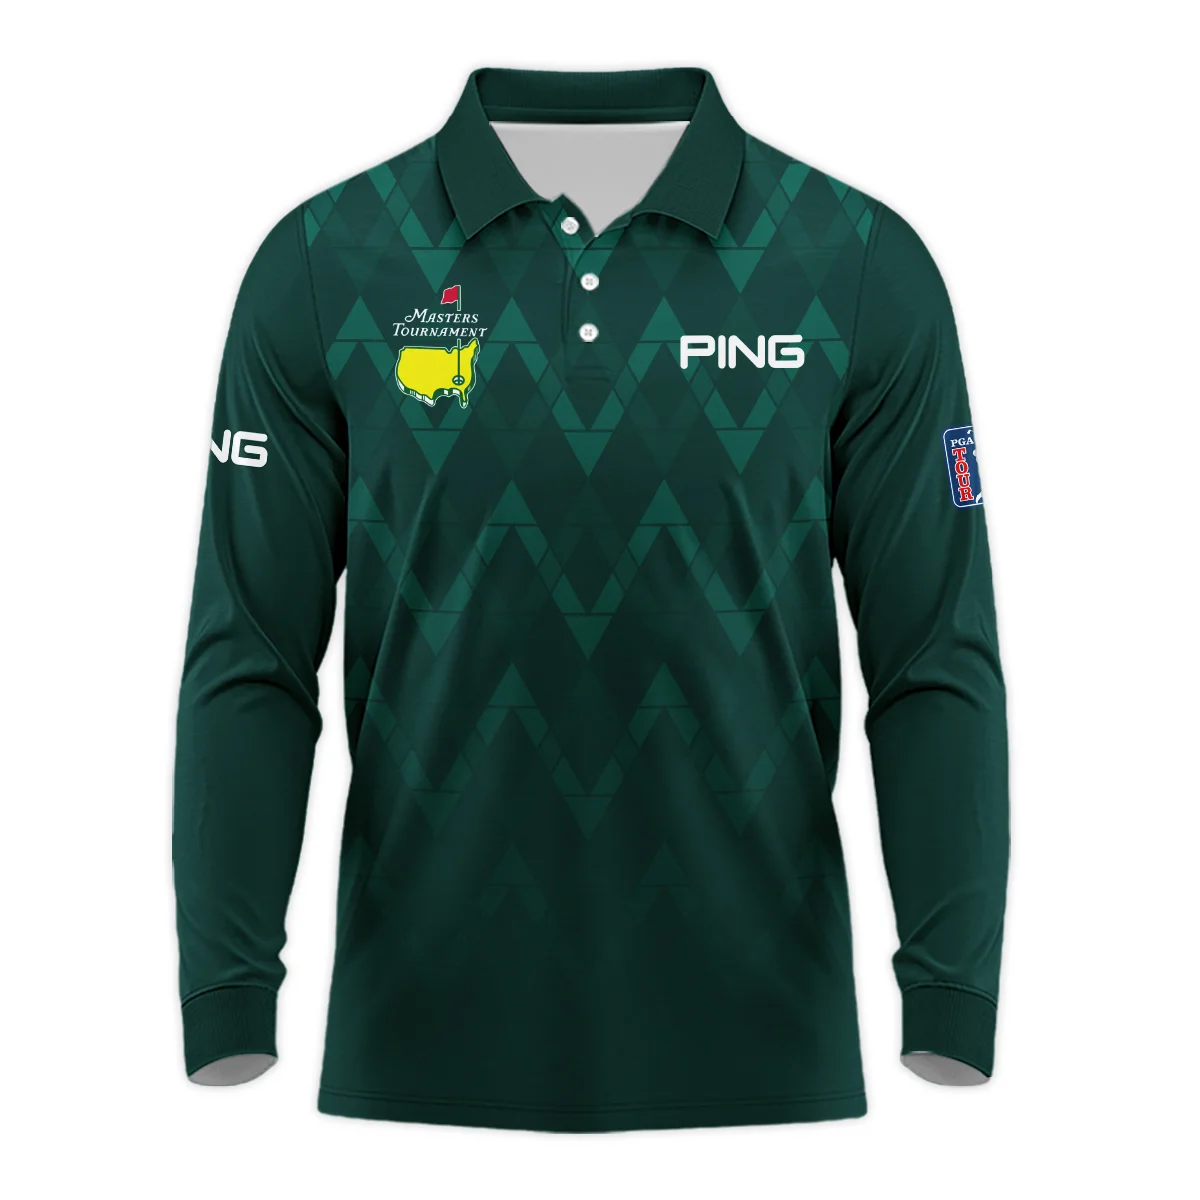 Abstract Dark Green Zigzag Background Masters Tournament Ping Vneck Long Polo Shirt Style Classic Long Polo Shirt For Men